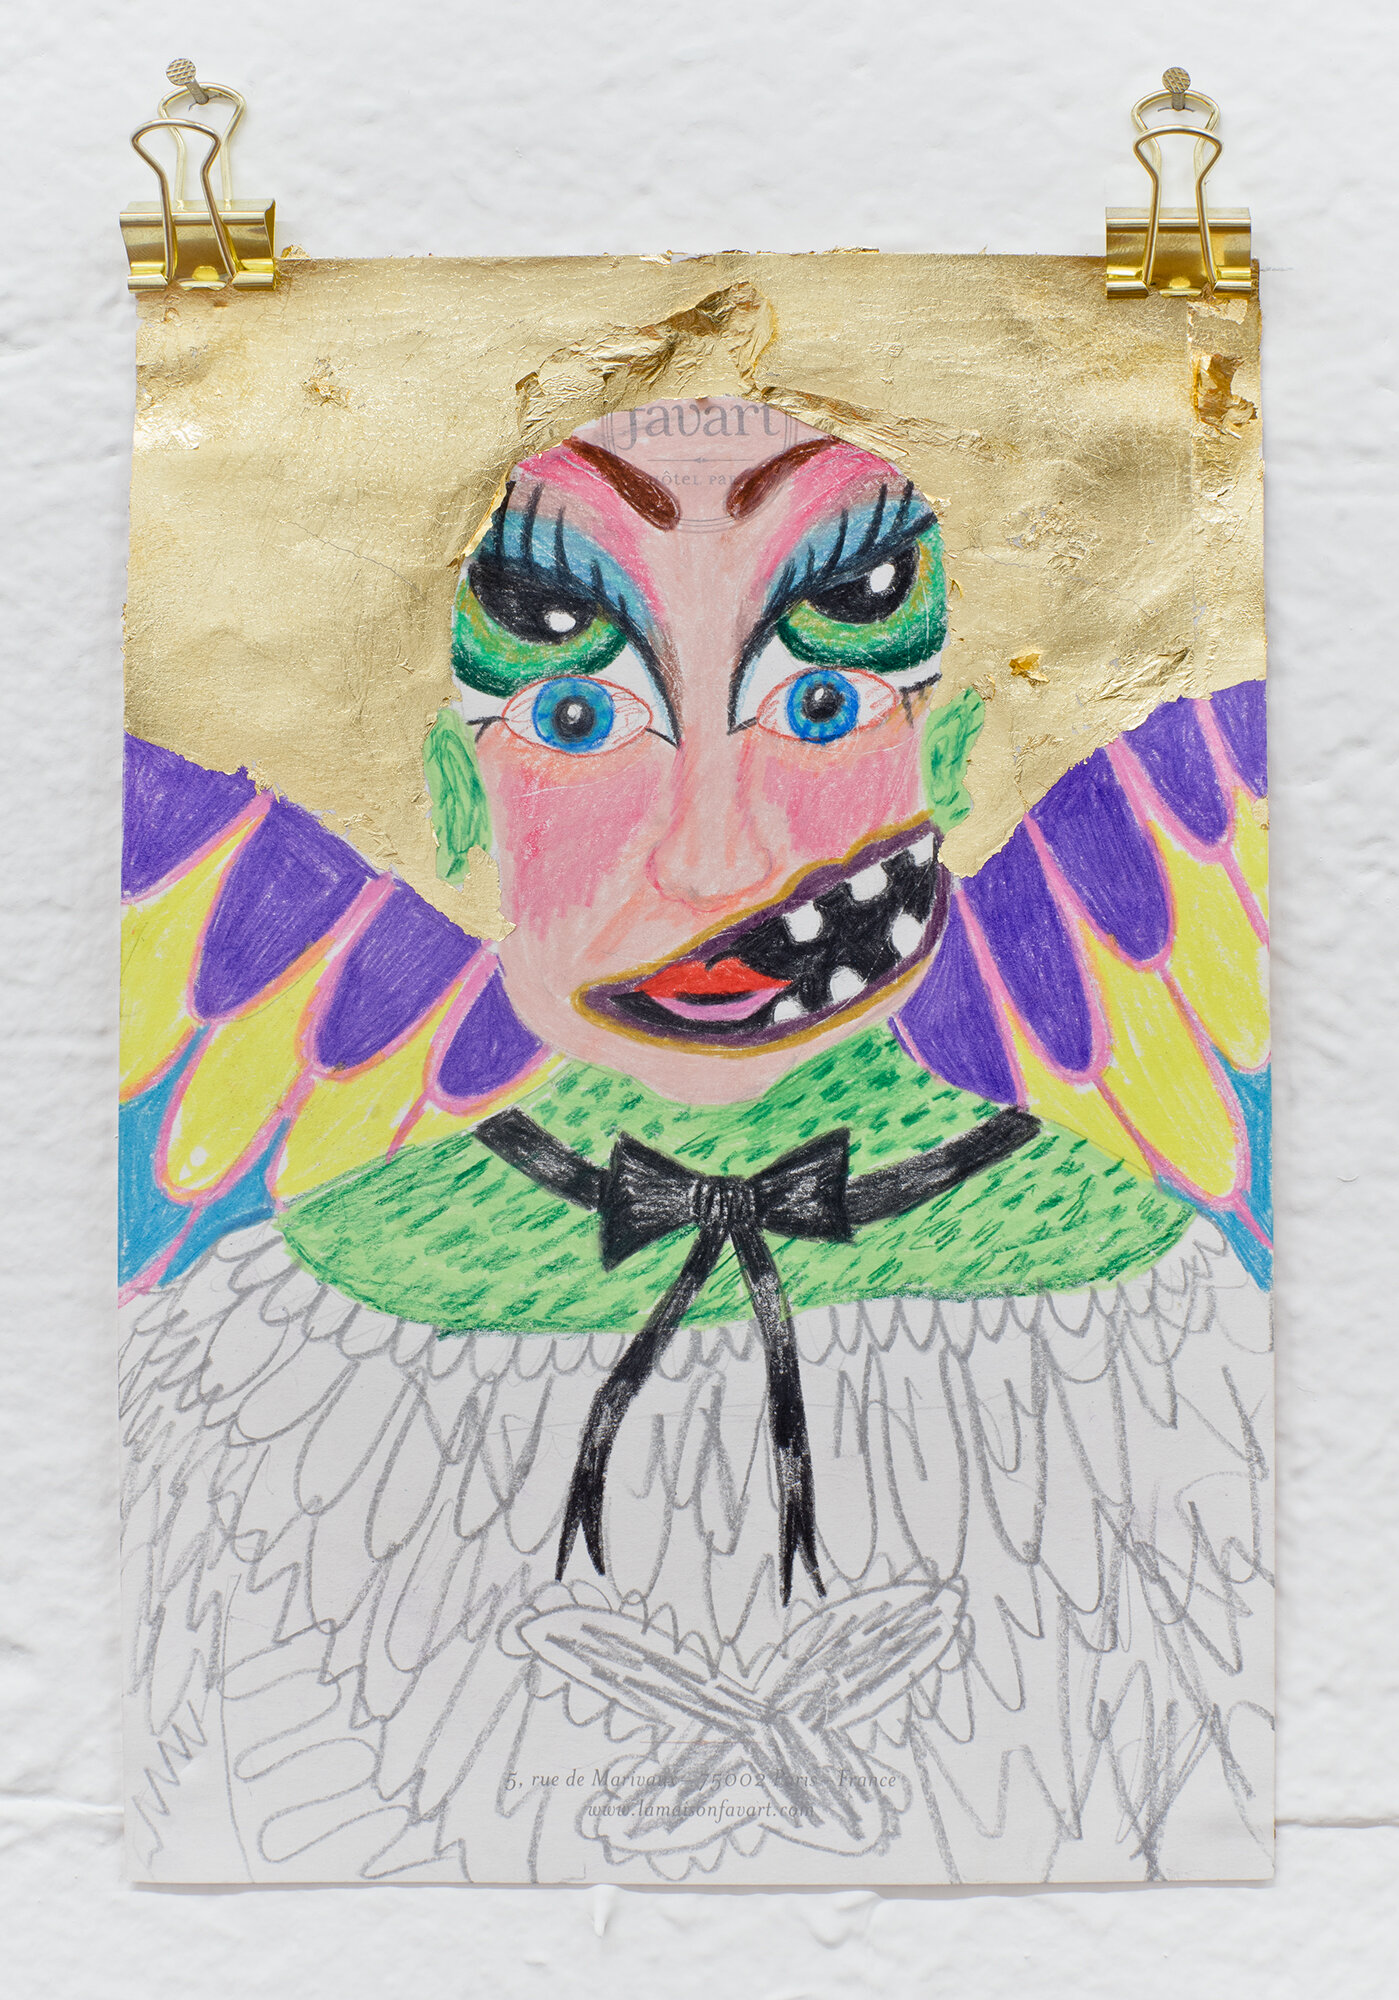   Angel Baby Bratz,  2017  8.25 x 6 inches (20.95 x 15.24 cm.)  Colored pencil and gilt on hotel stationary 8.25 x 6 inches  Private collection 